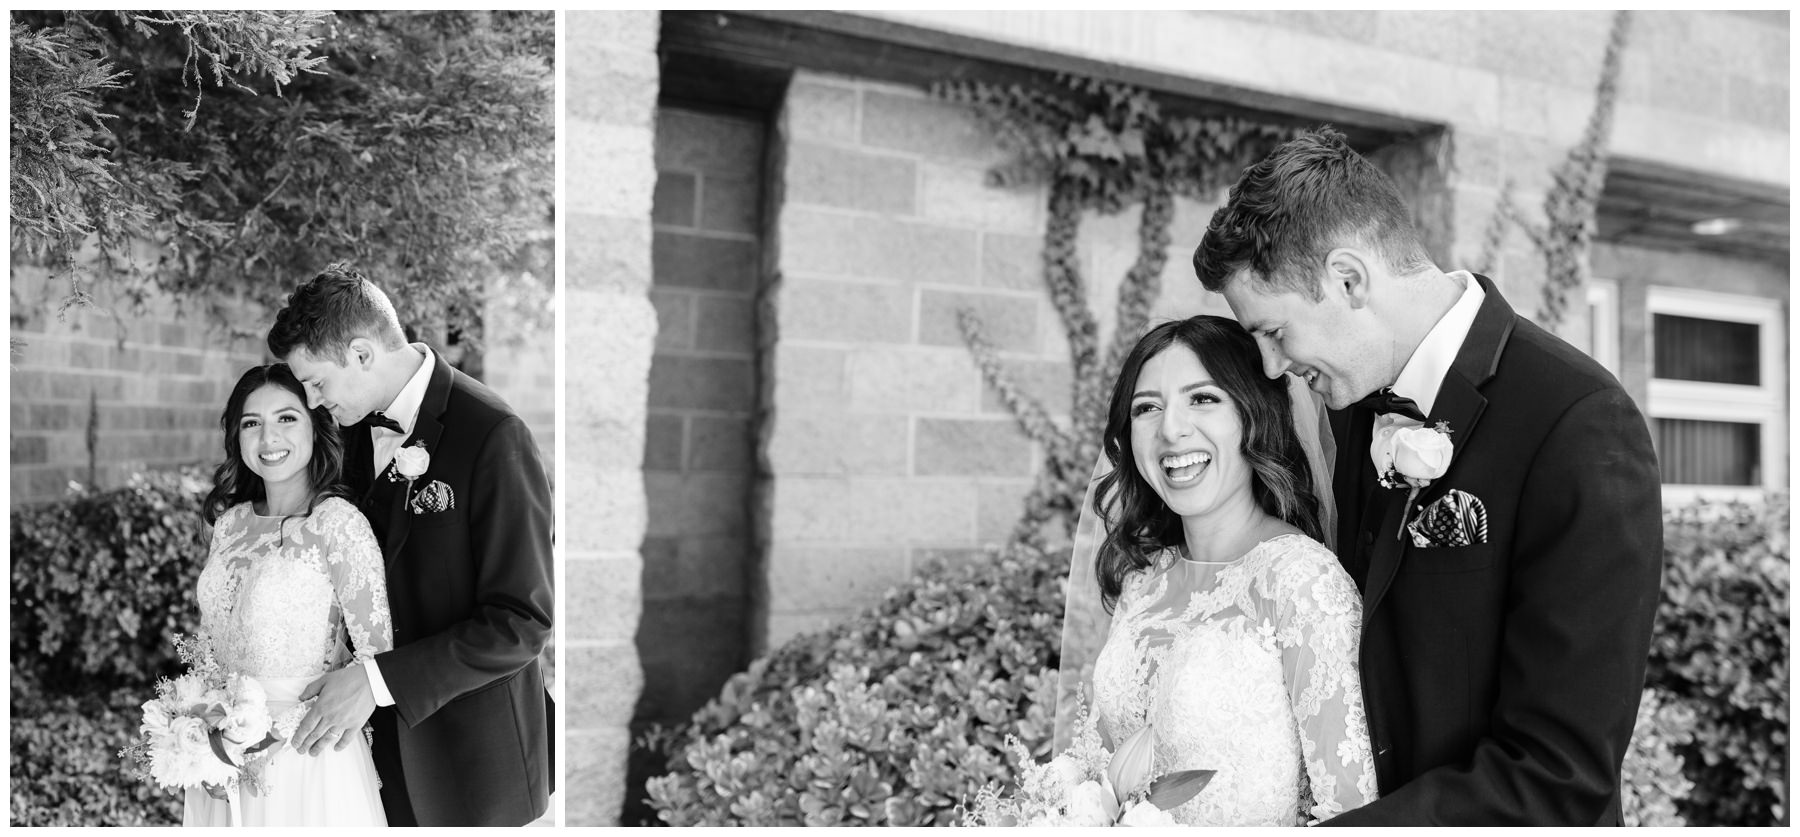 Black and White Bride and Groom photos